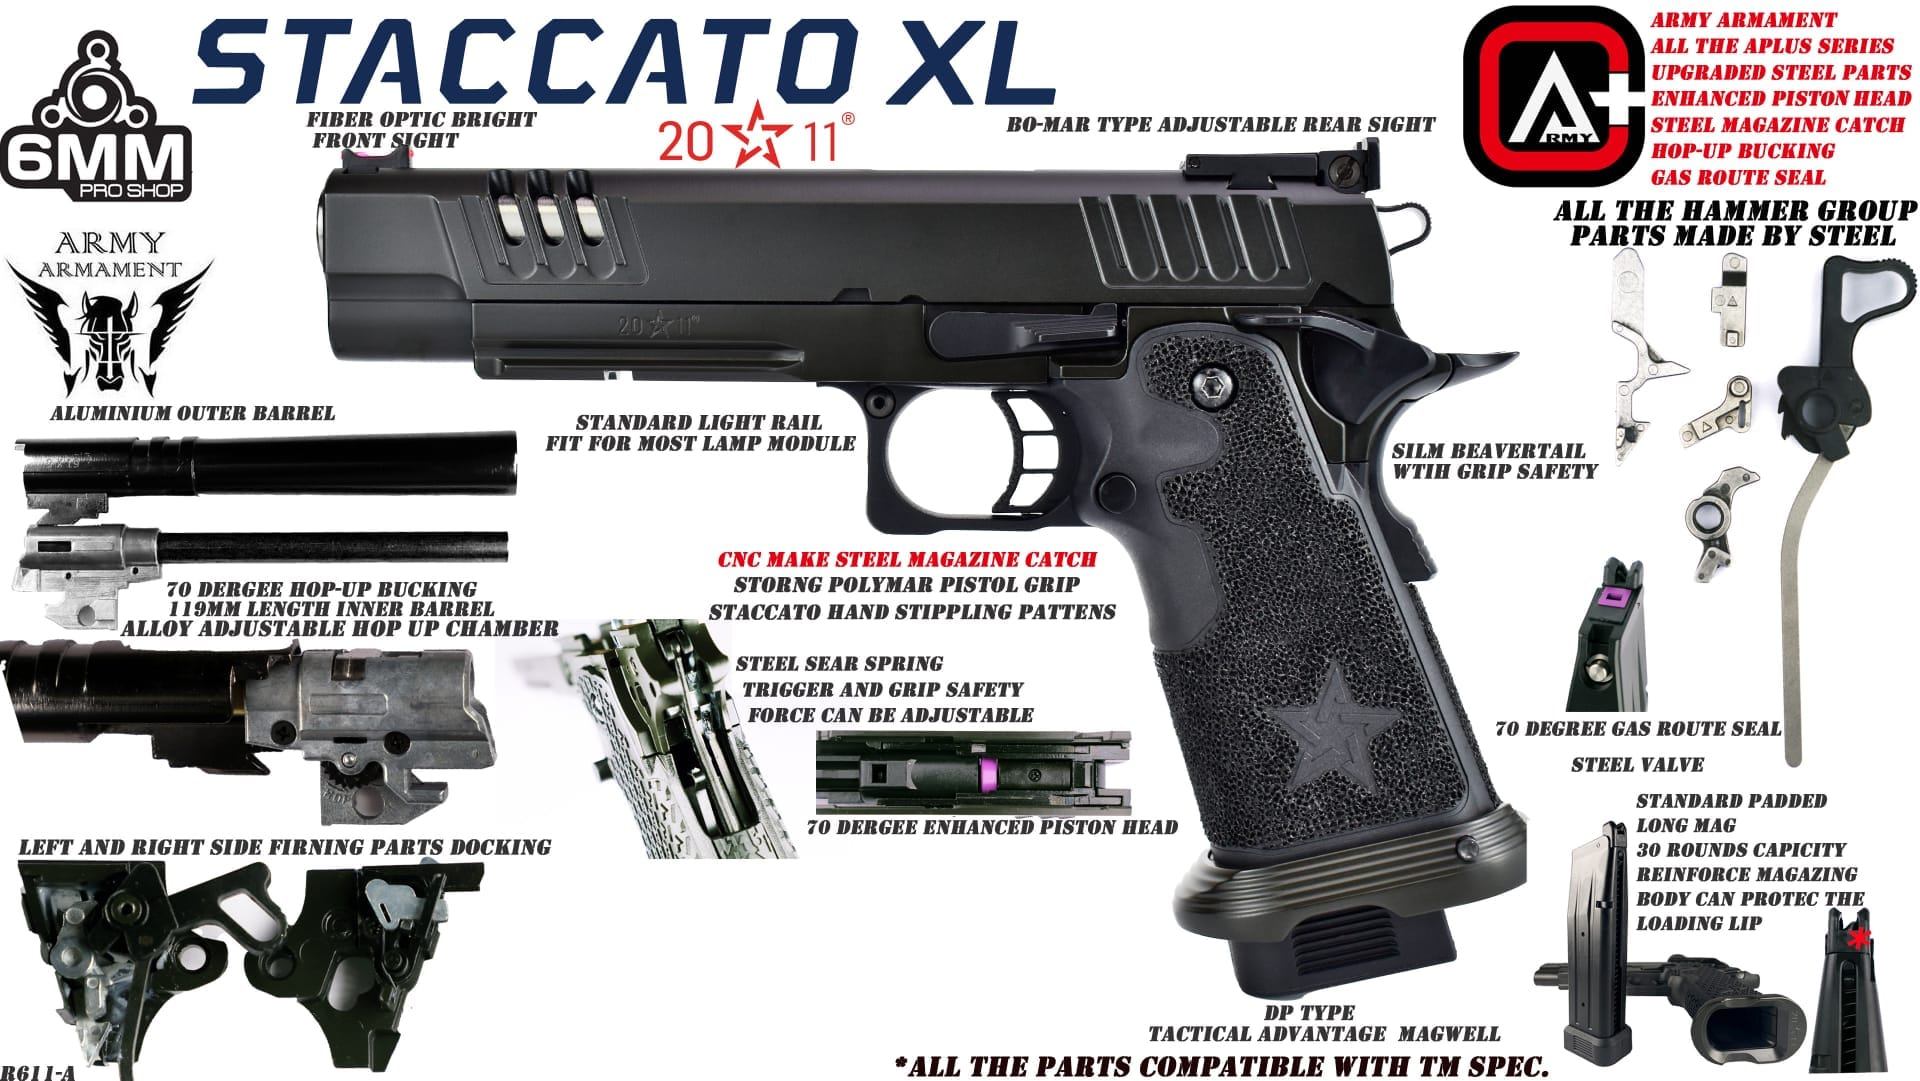 Army Armament Staccato XL